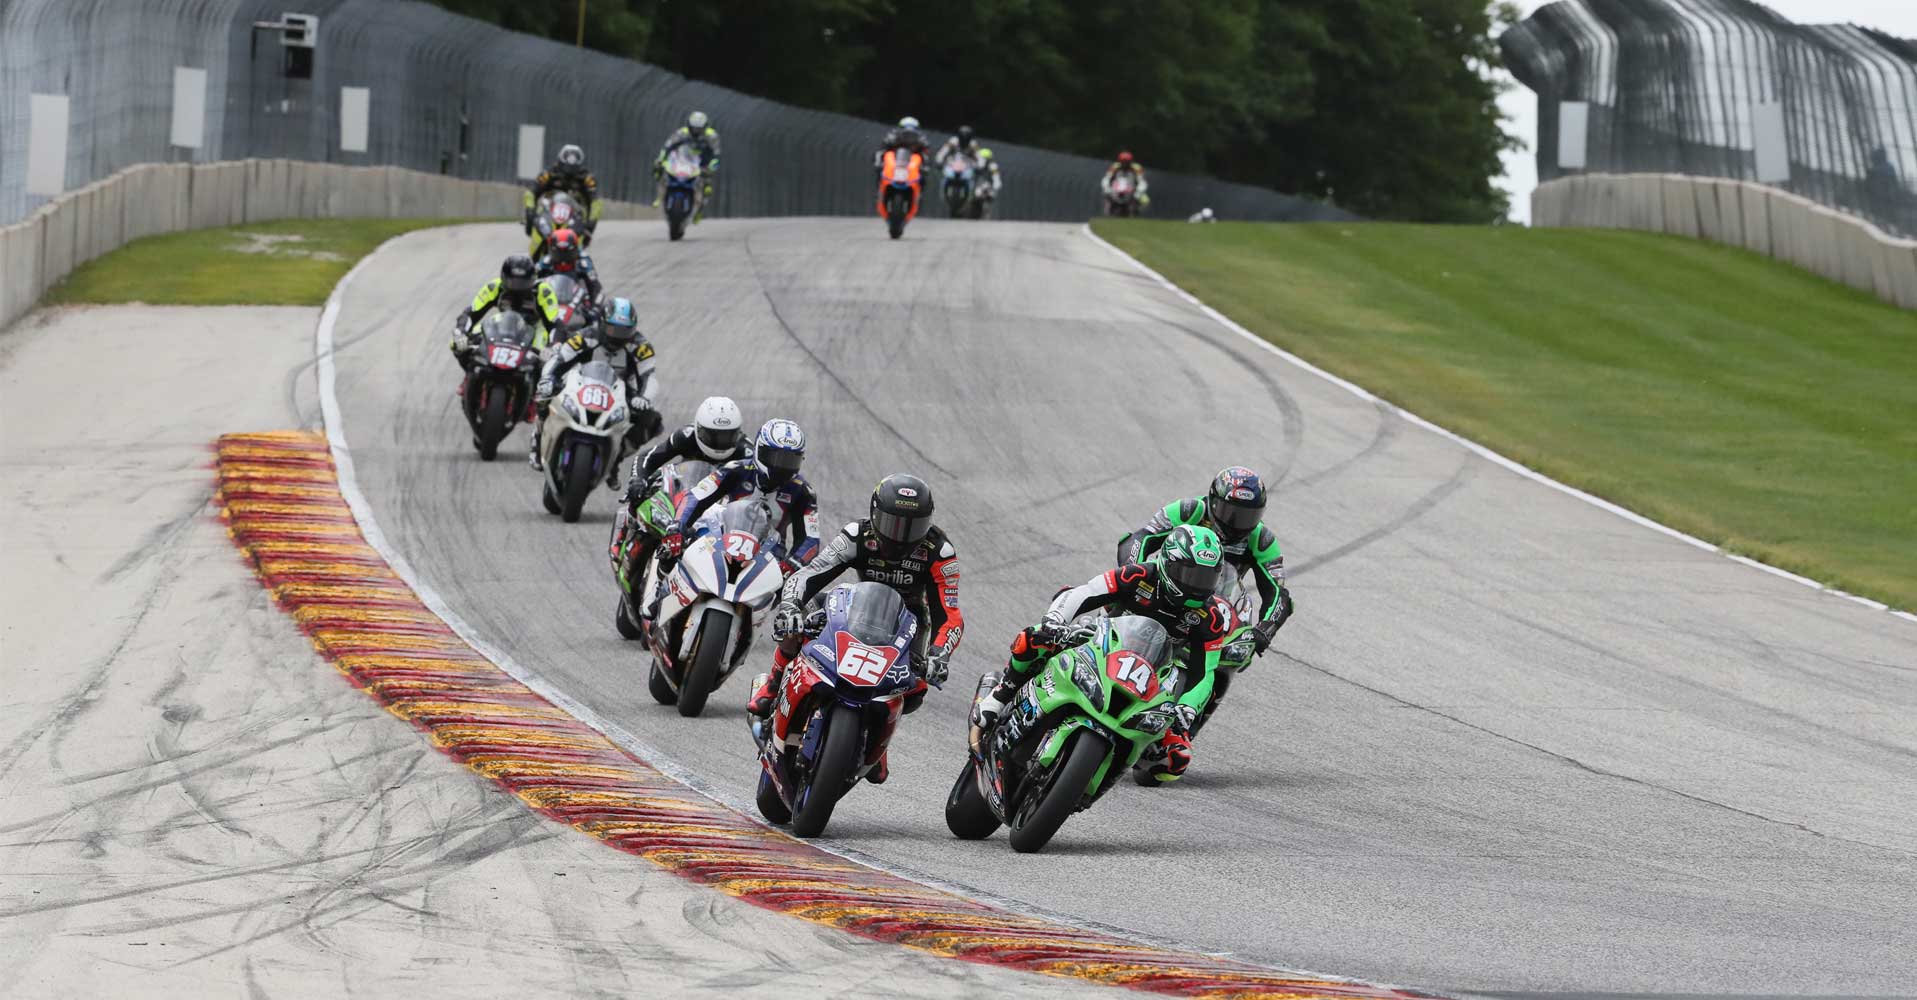 Andy DiBrino leading the pack ripping down the track MotoAmerica Wisconsin on his EDR Performance R1 - maybe a little wheelie but we'll have to ask Andy.